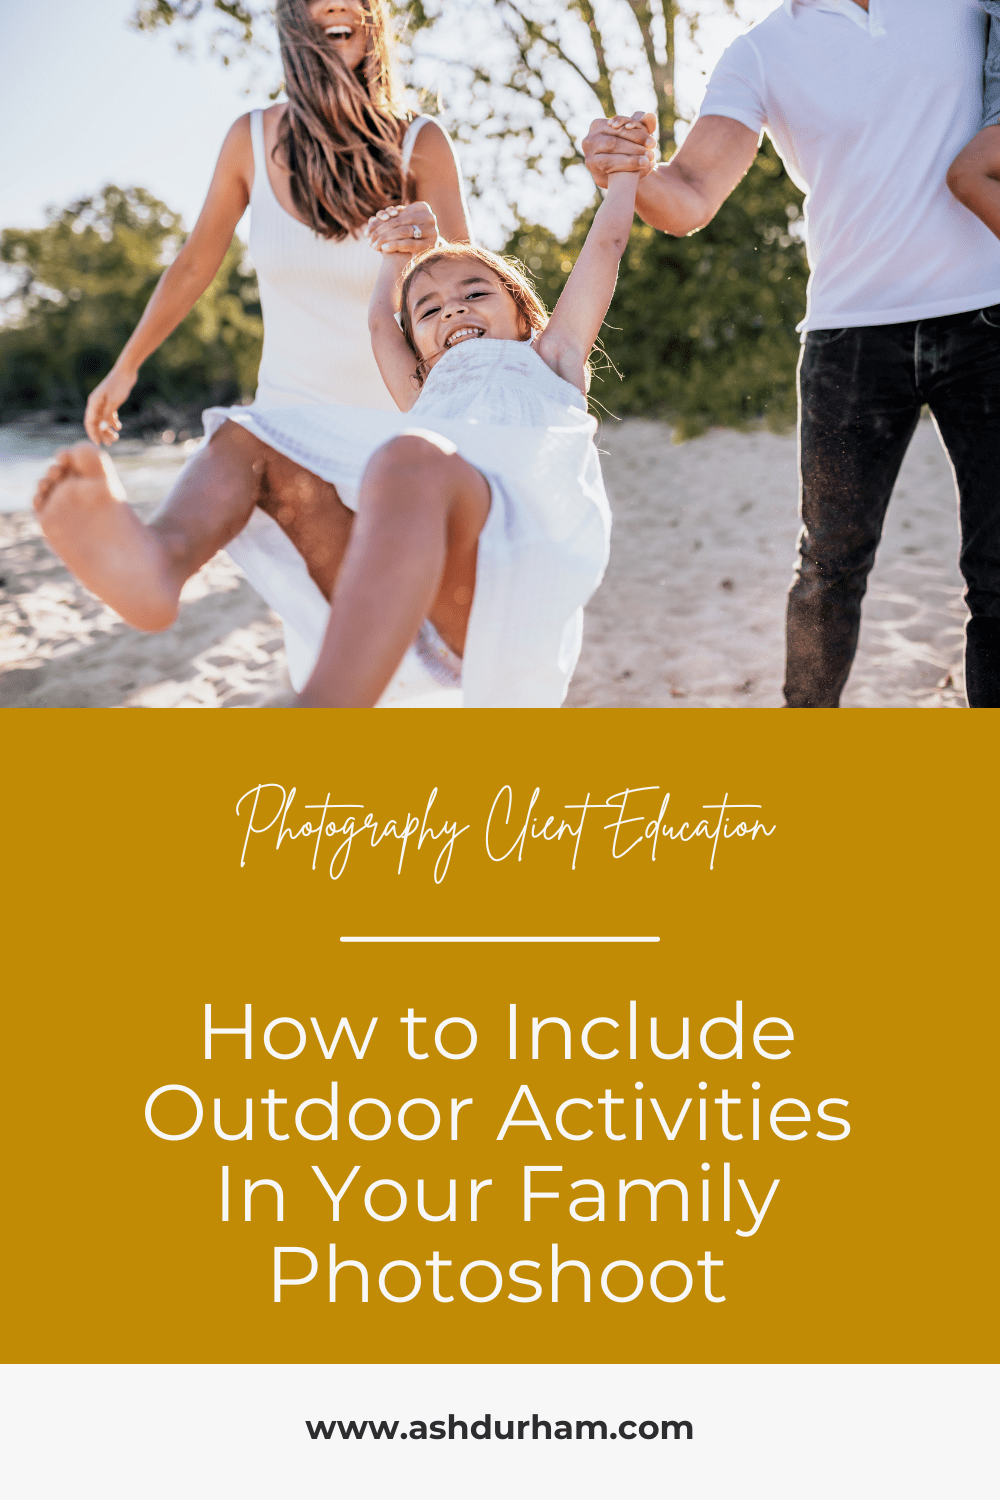 How to Include Outdoor Activities In Your Family Photoshoot